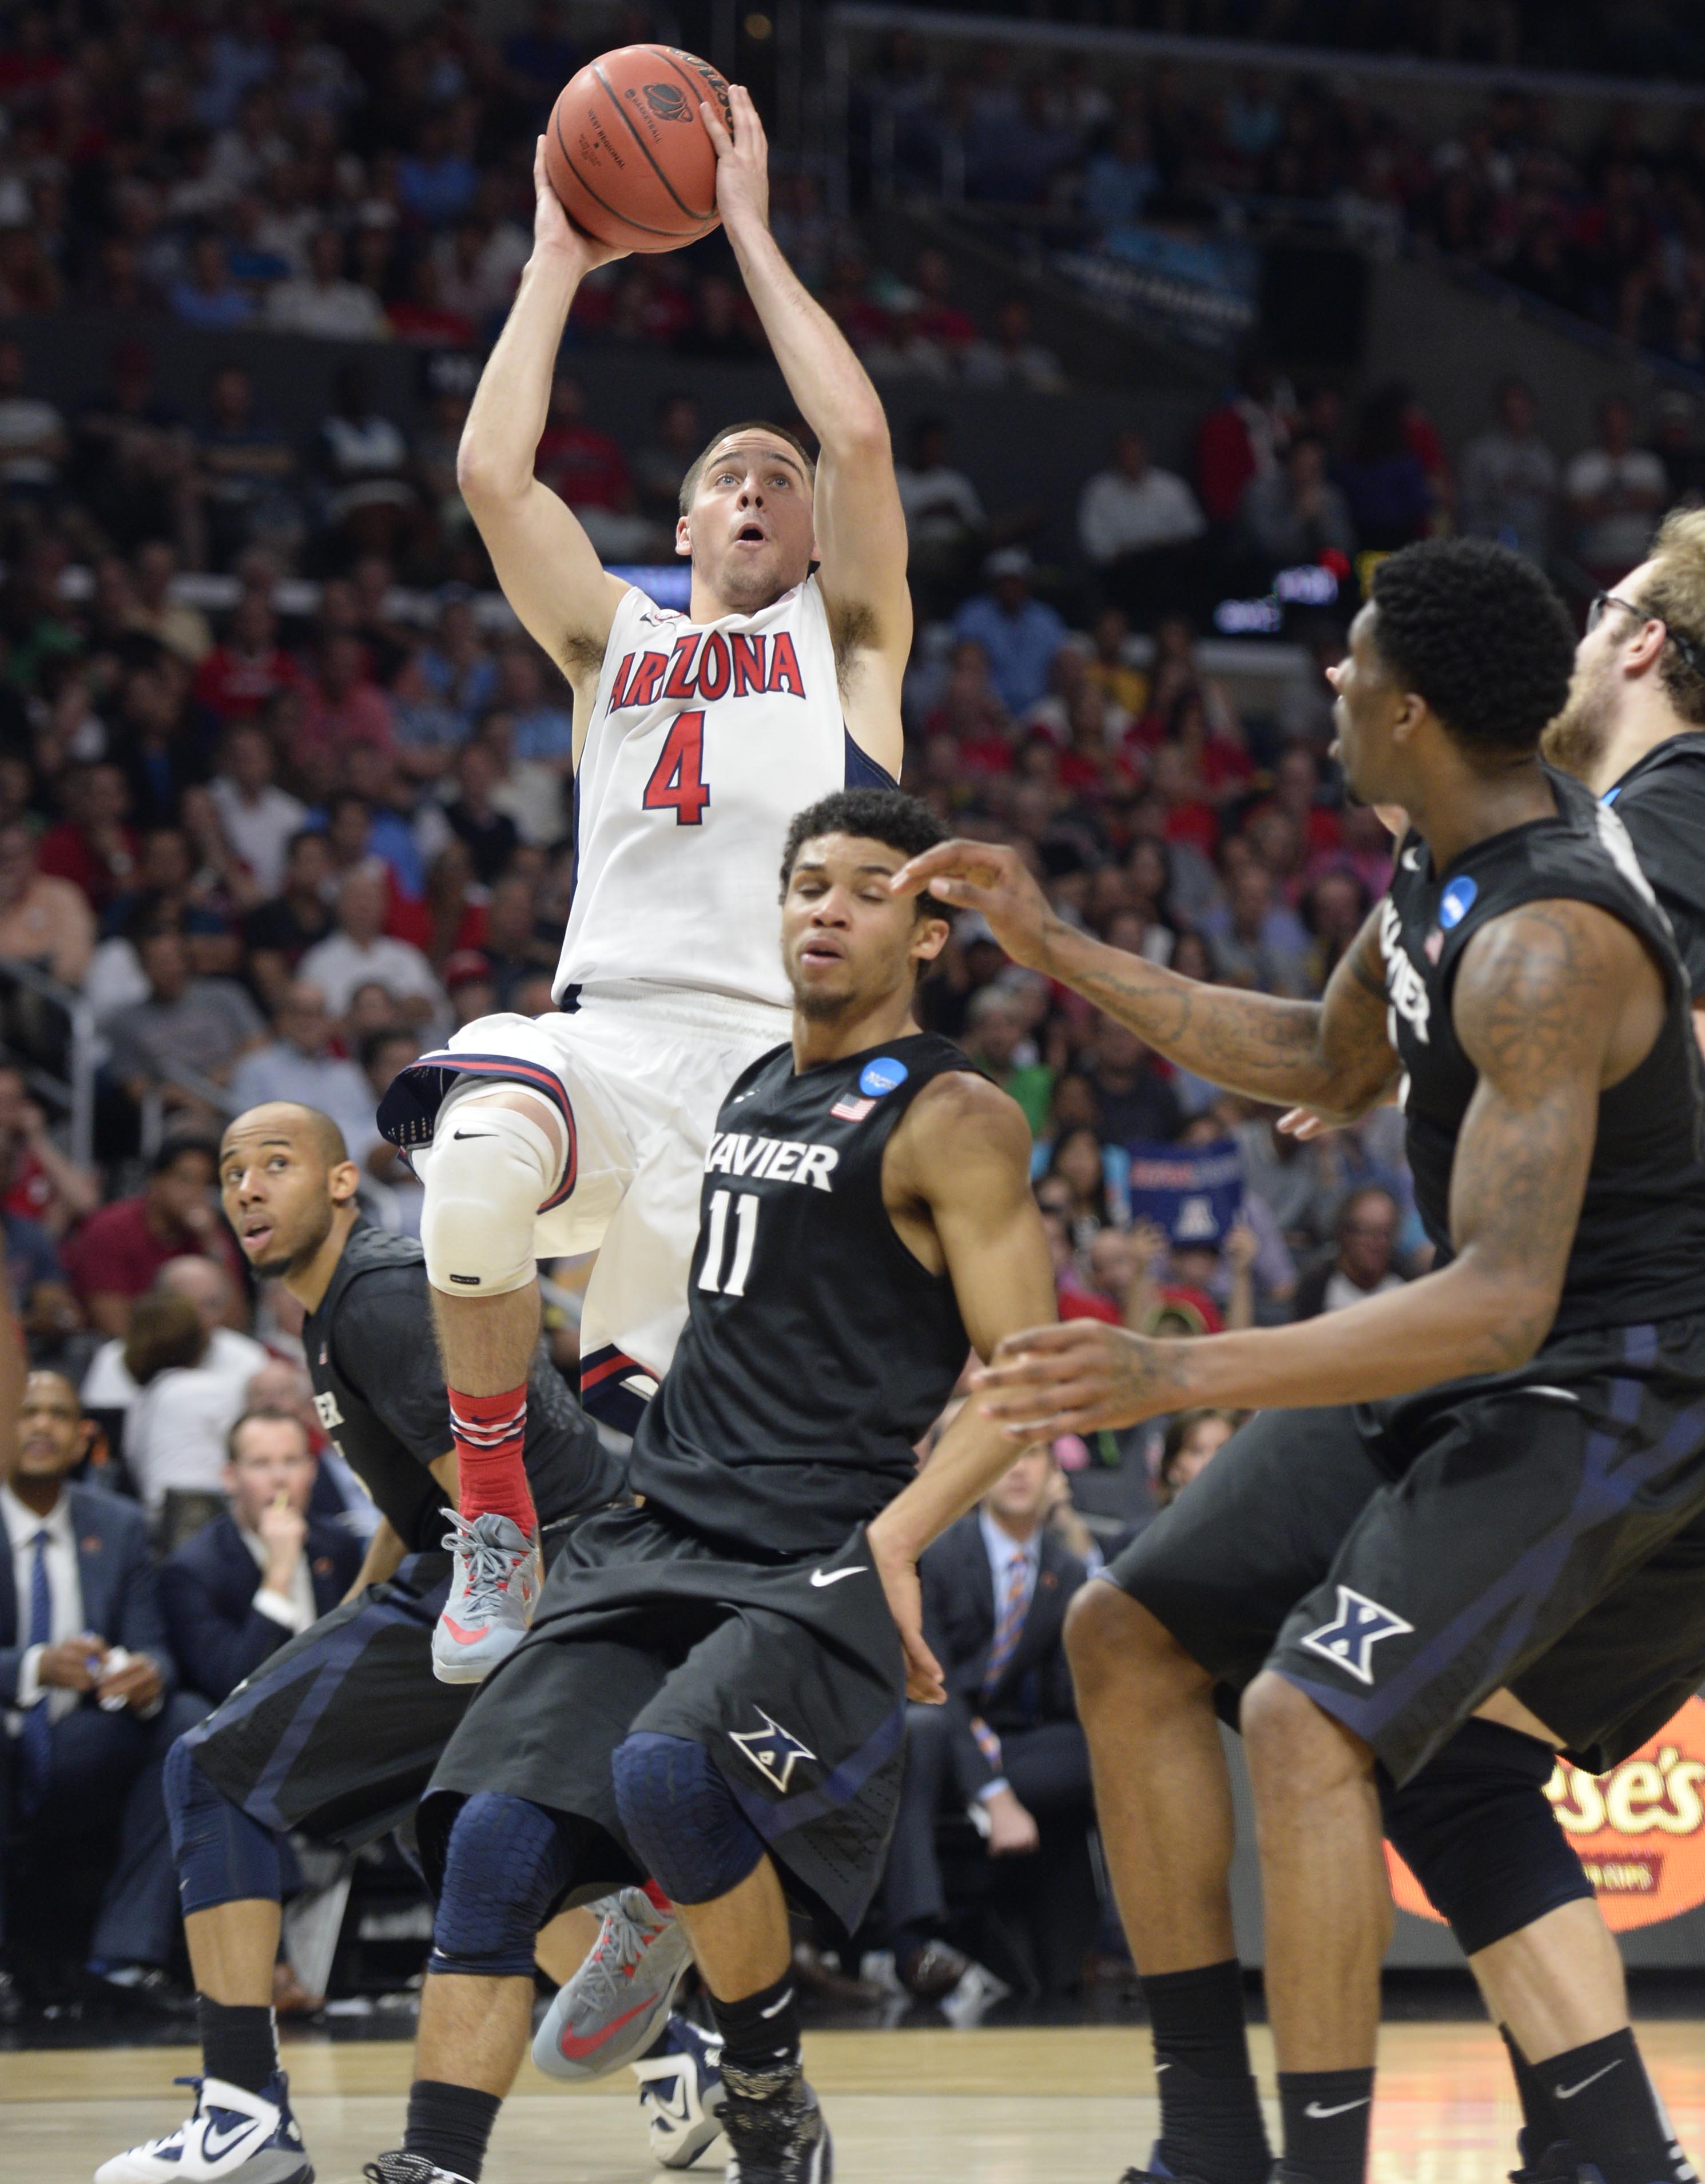 Mar 26, 2015; Los Angeles, CA, USA; Arizona Wildcats guard T.J. McConnell (4) moves to the basket against Xavier Musketeers guard Dee Davis (11) during the first half in the semifinals of the west regional of the 2015 NCAA Tournament at Staples Center. (Robert Hanashiro-USA TODAY Sports )